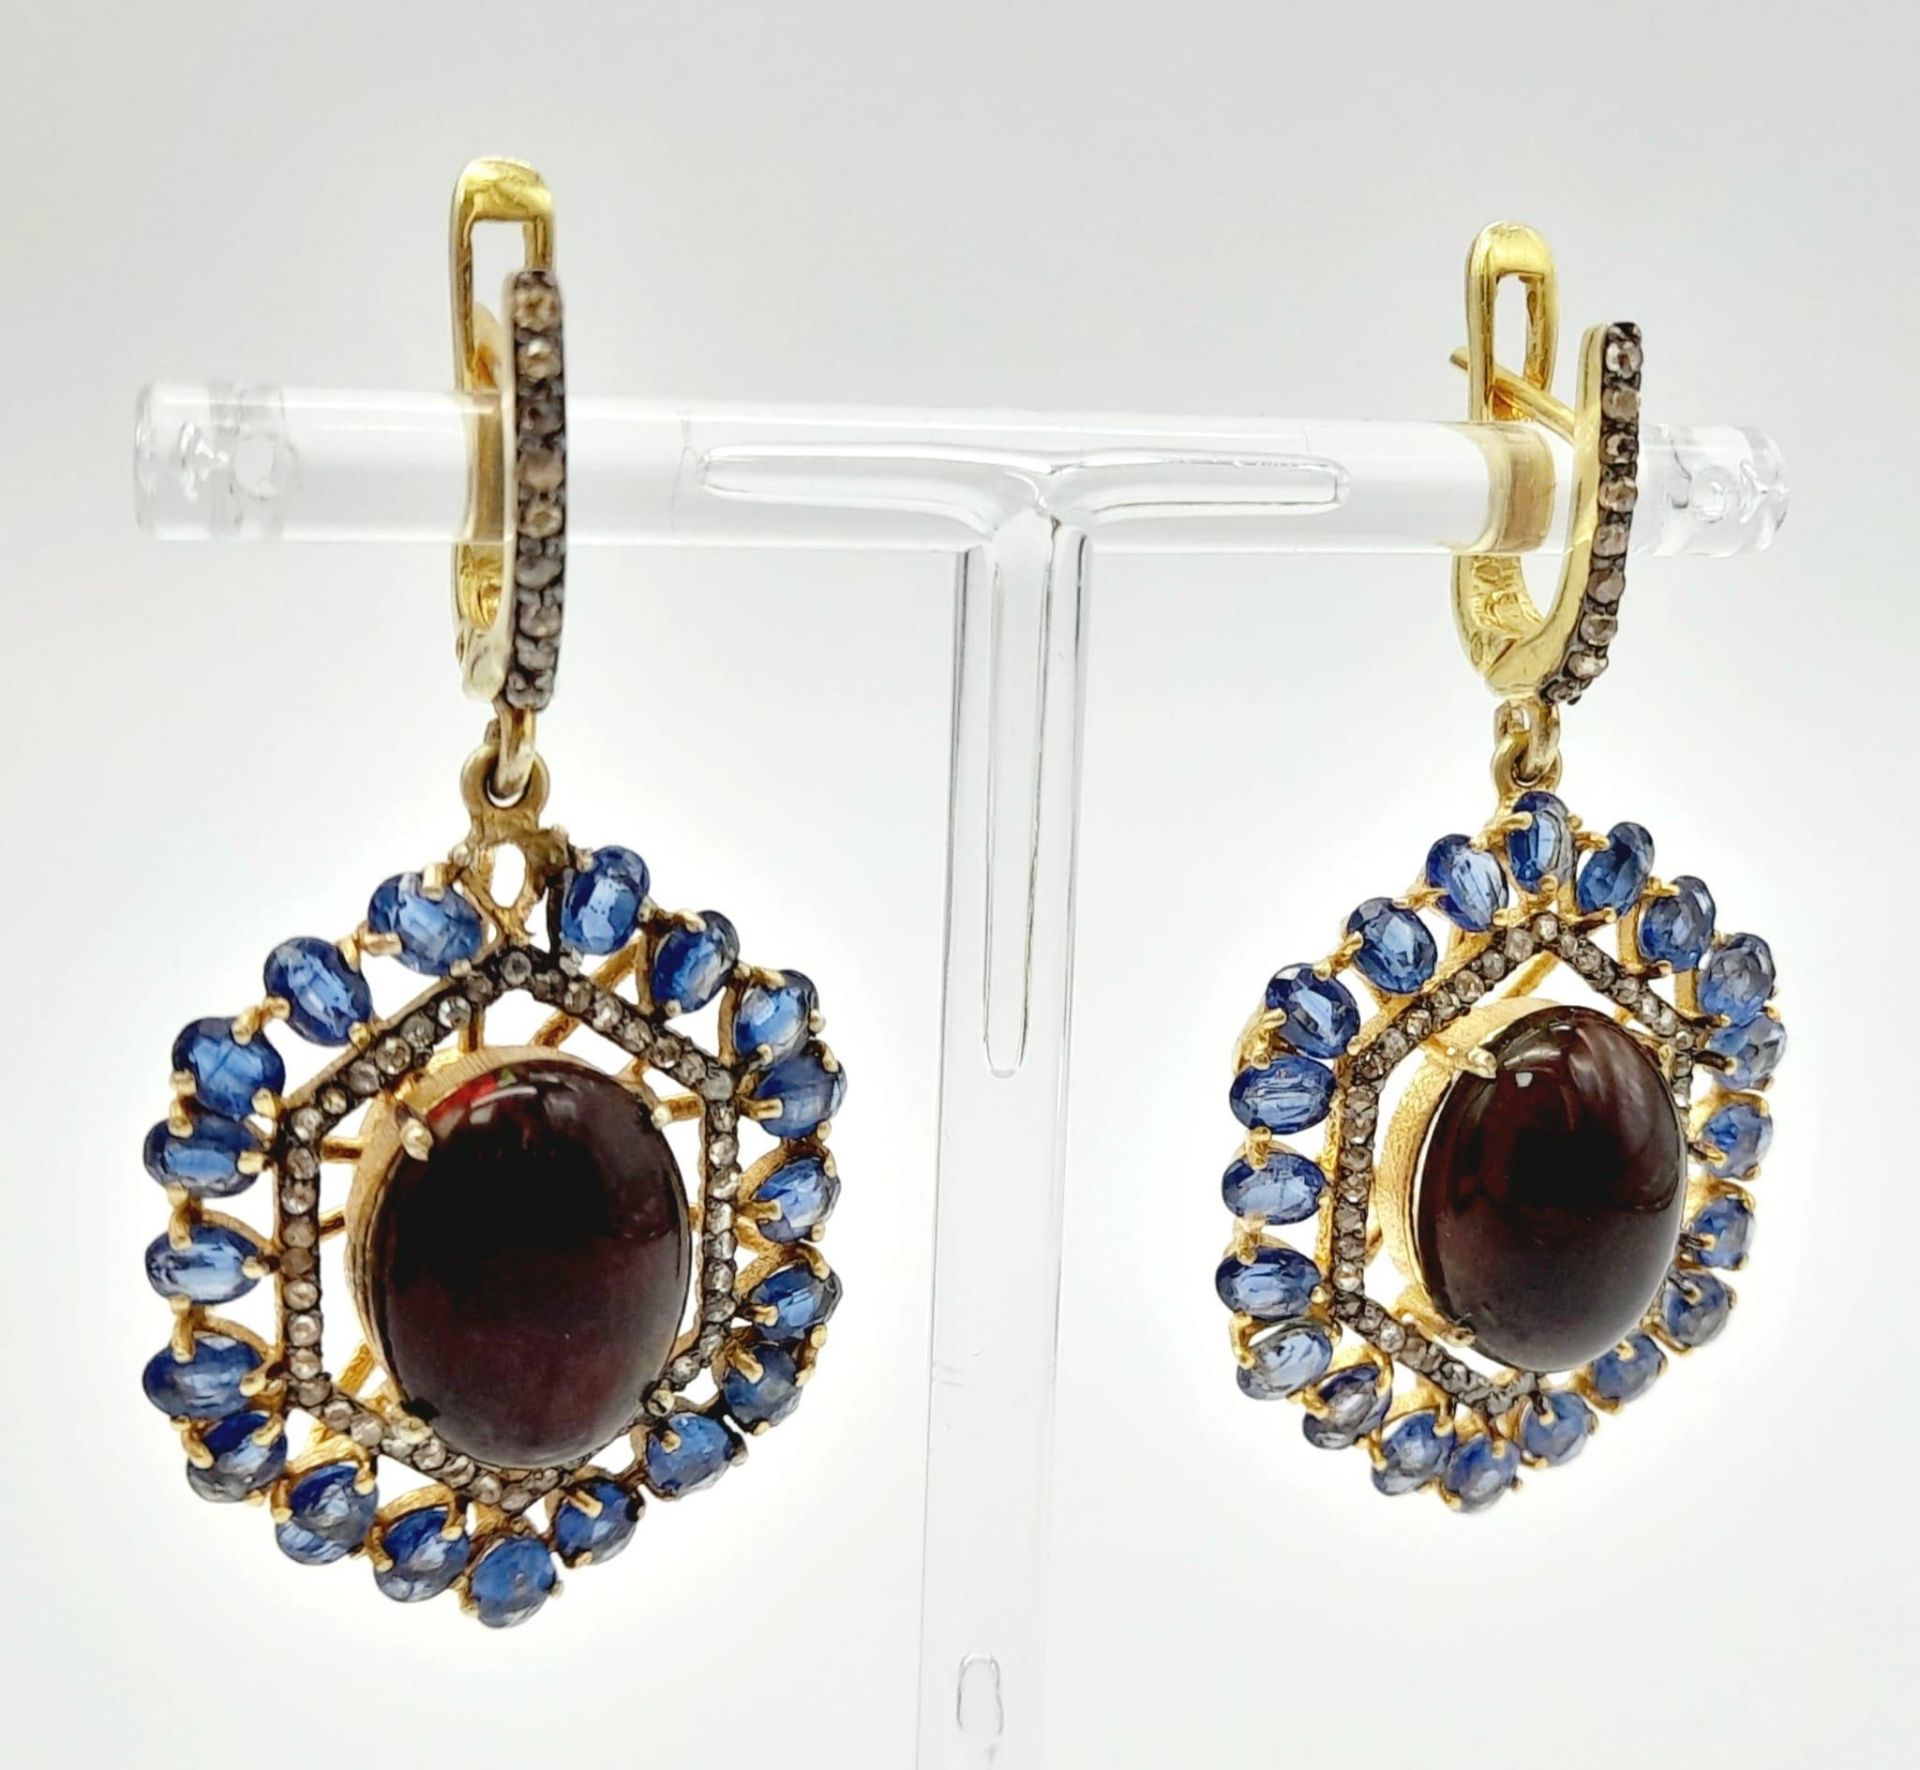 A Pair of Fire Opal and Kyanite Gemstone Hexagonal Drop Earrings. Set in gold plated 925 silver. - Image 7 of 7